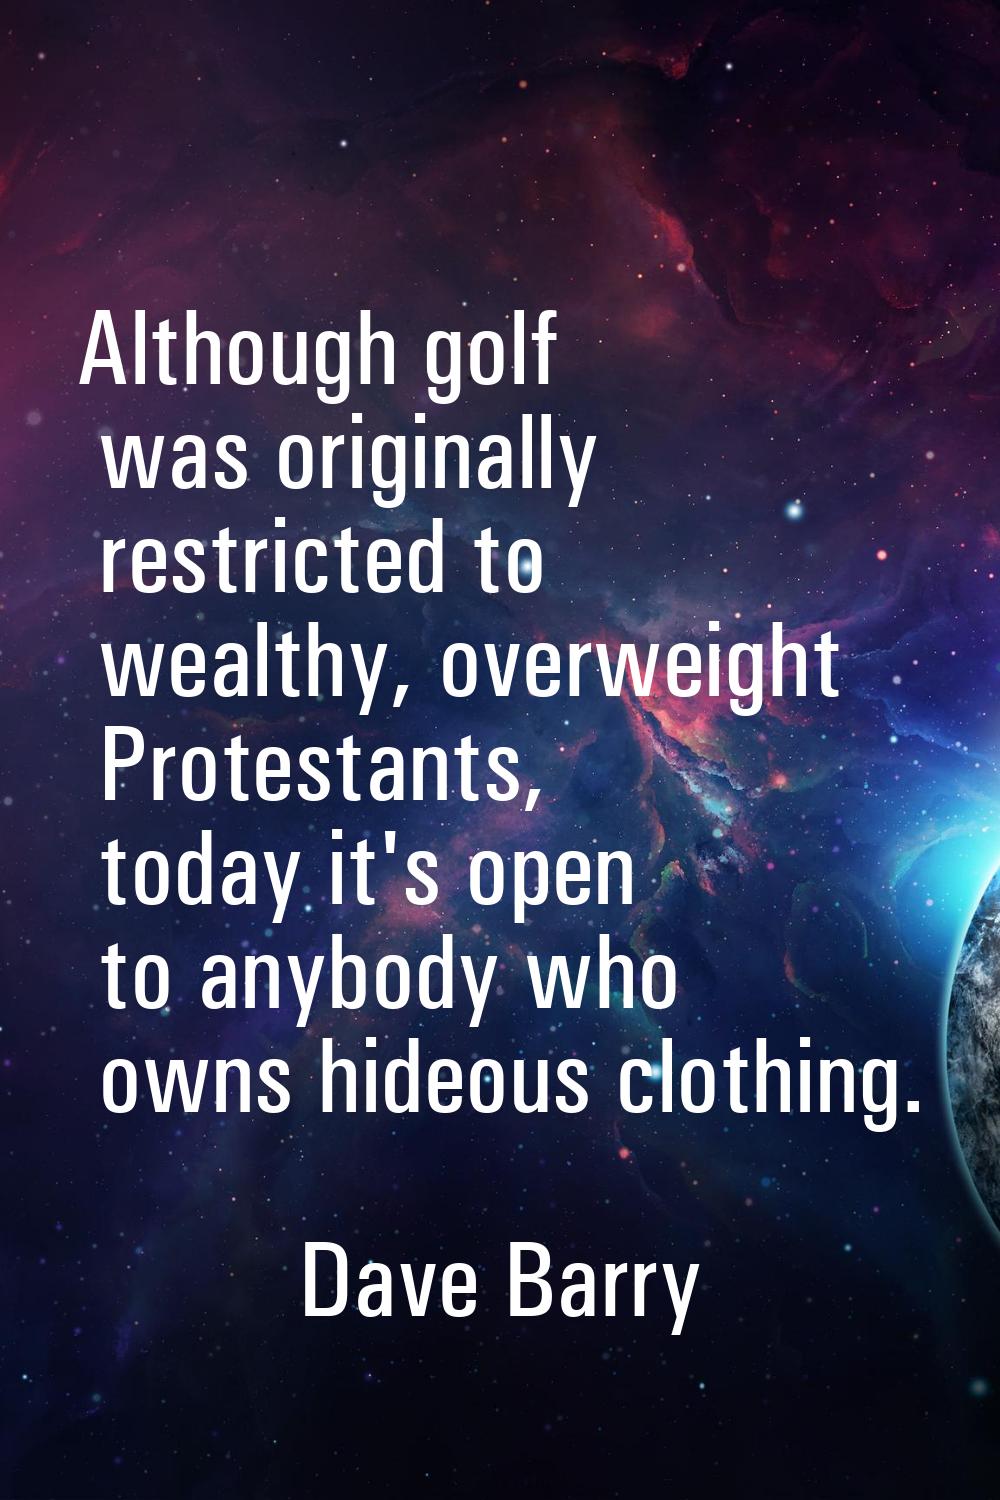 Although golf was originally restricted to wealthy, overweight Protestants, today it's open to anyb